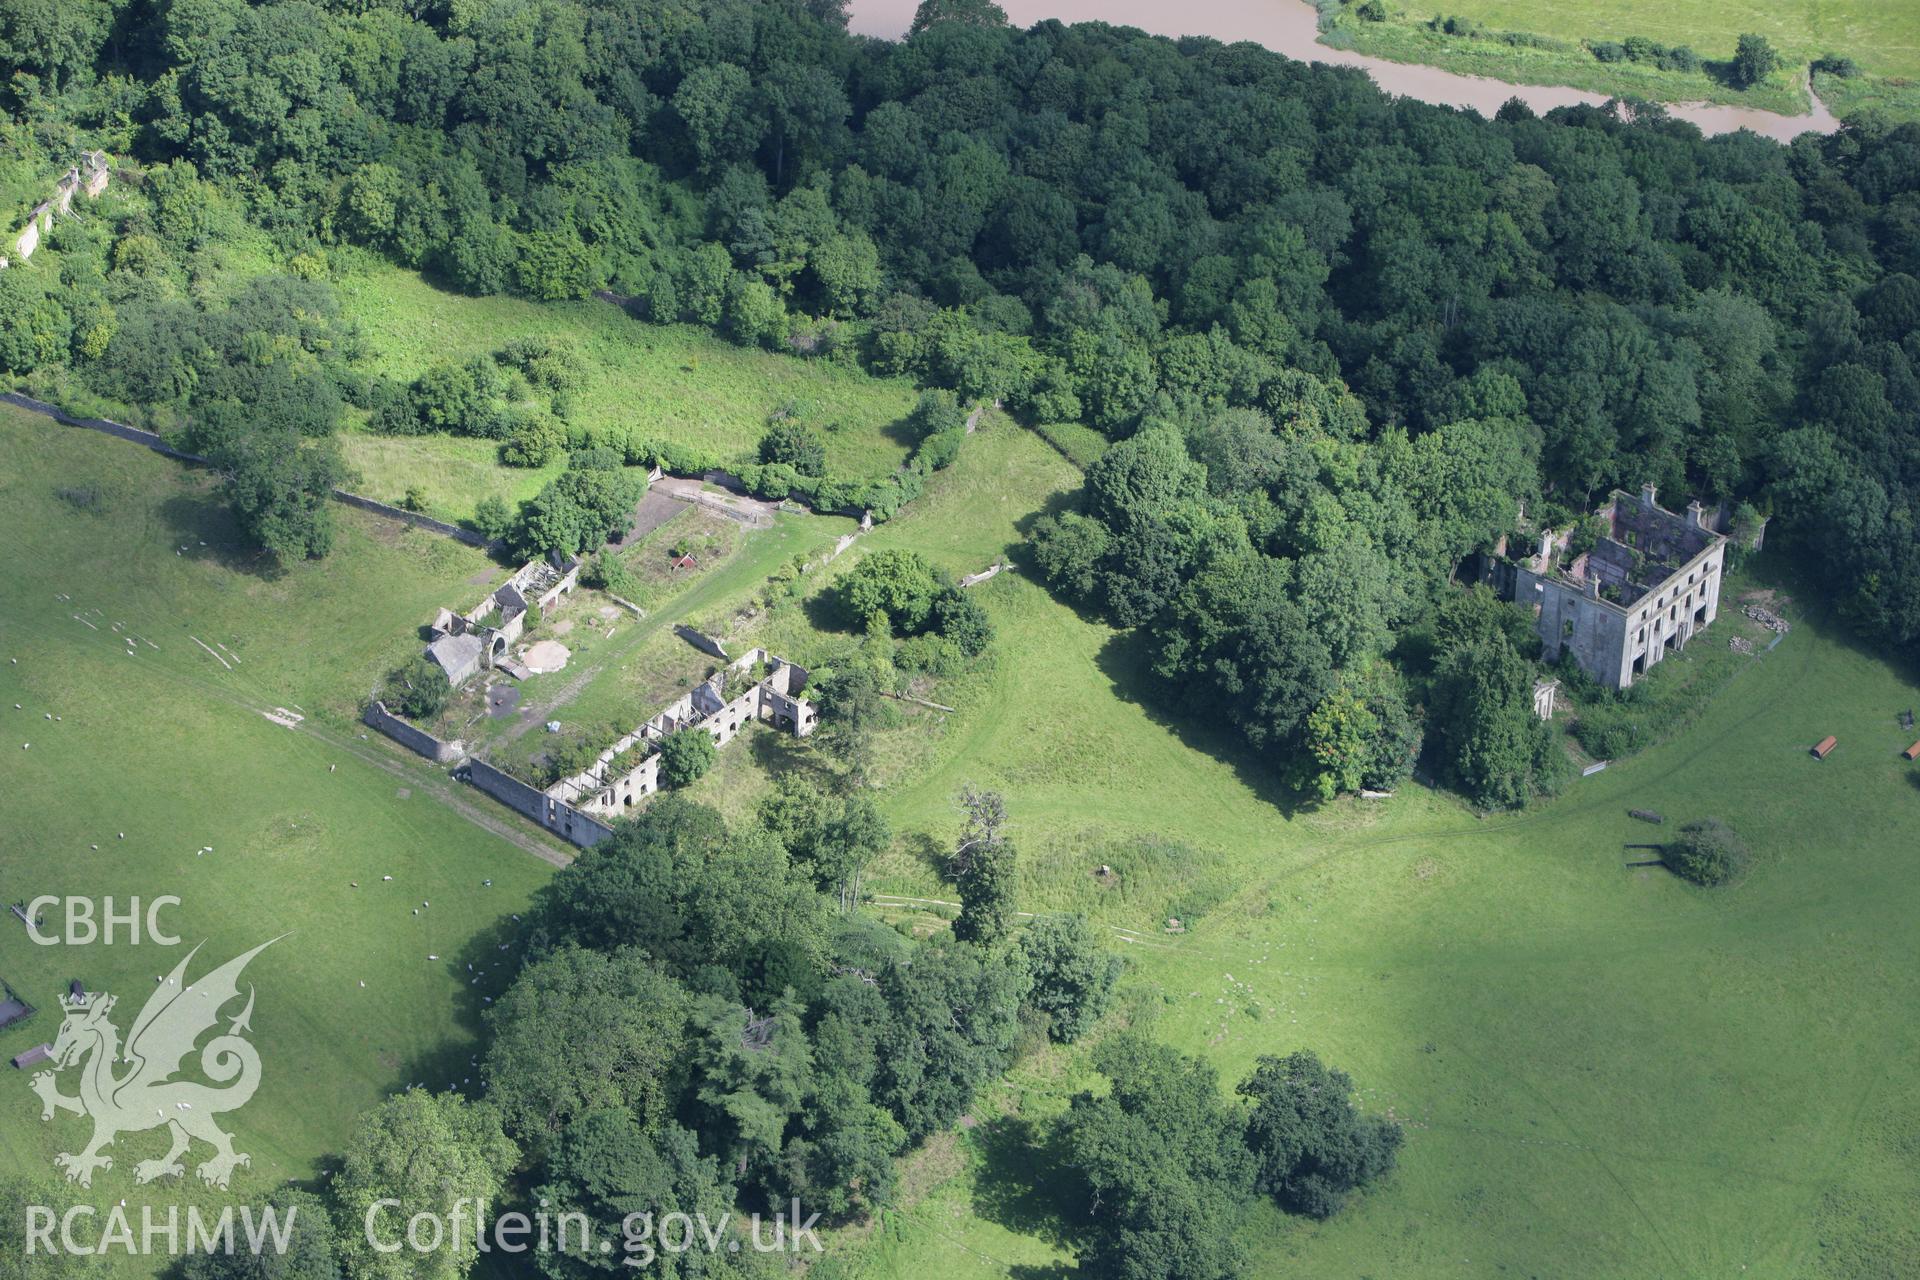 RCAHMW colour oblique photograph of Piercefield House and Garden ruins. Taken by Toby Driver on 21/07/2008.